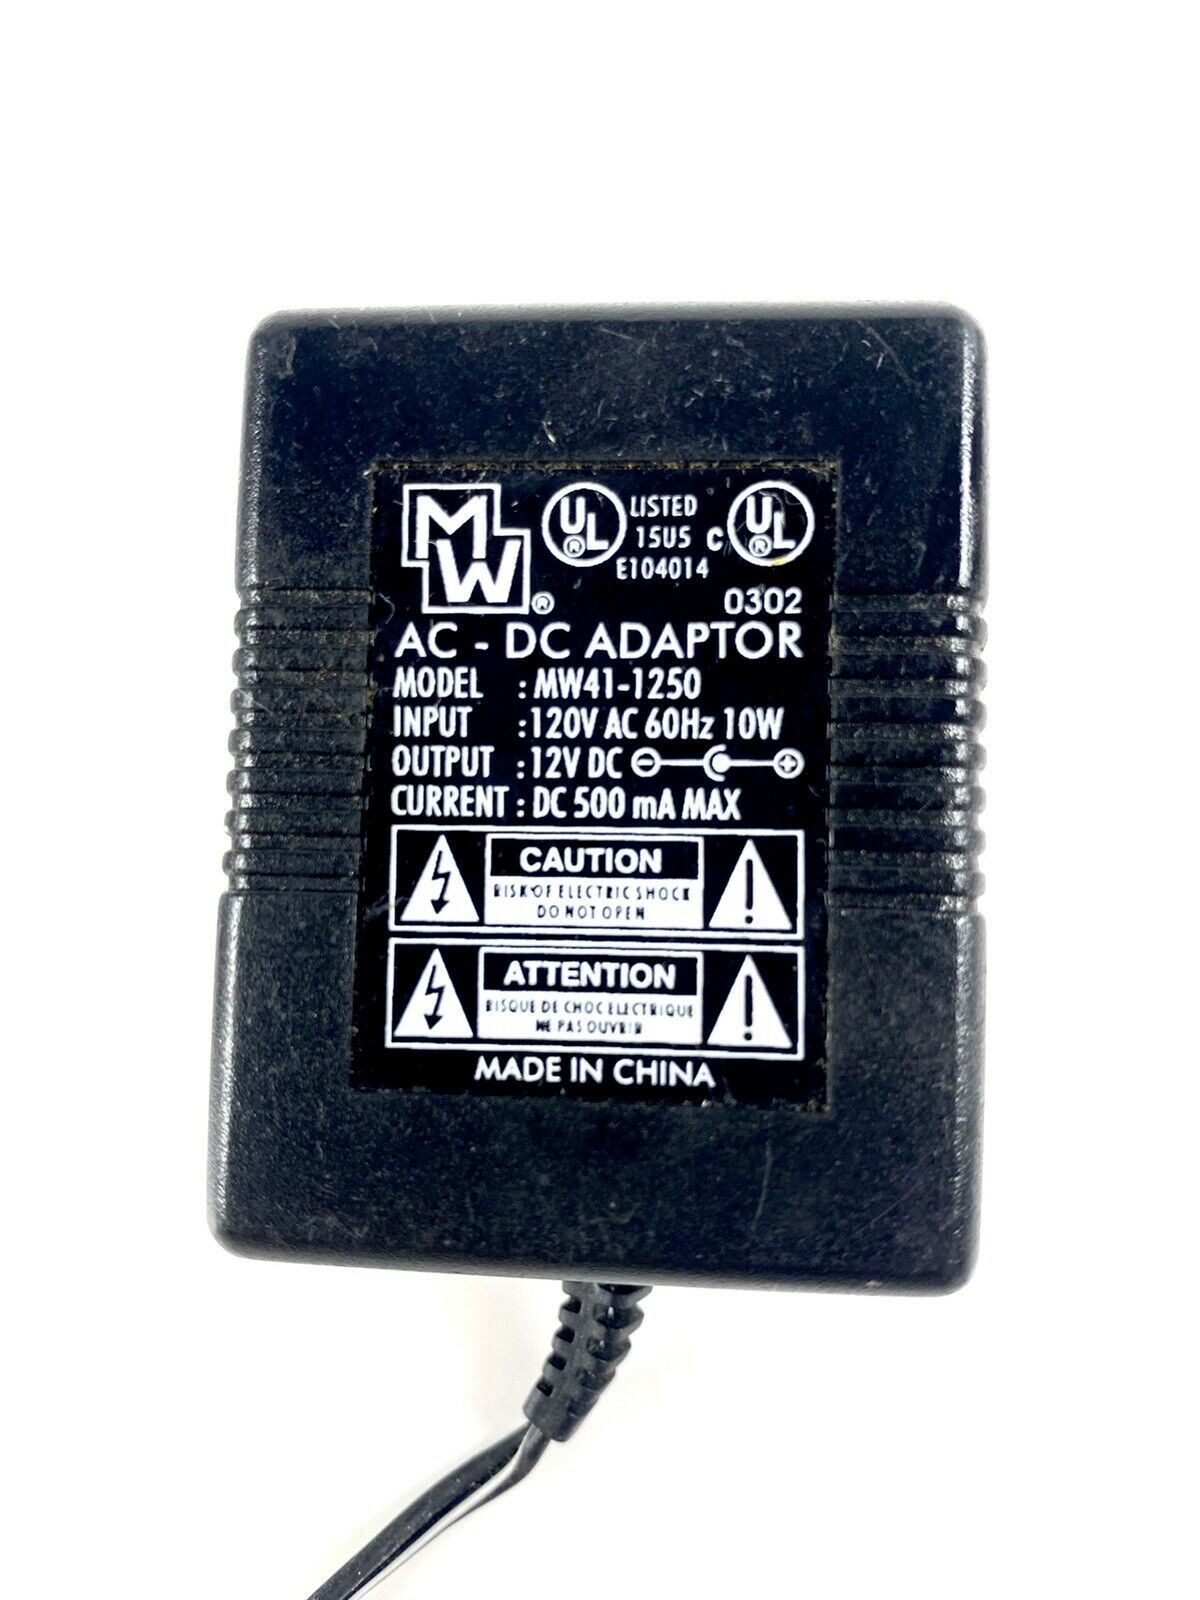 US Power adapter AC/DC 12V 500mA 2.5MM X 5.5MM MW41-1250 Brand: Unbranded Type: Adapter Connection Split/Duplication